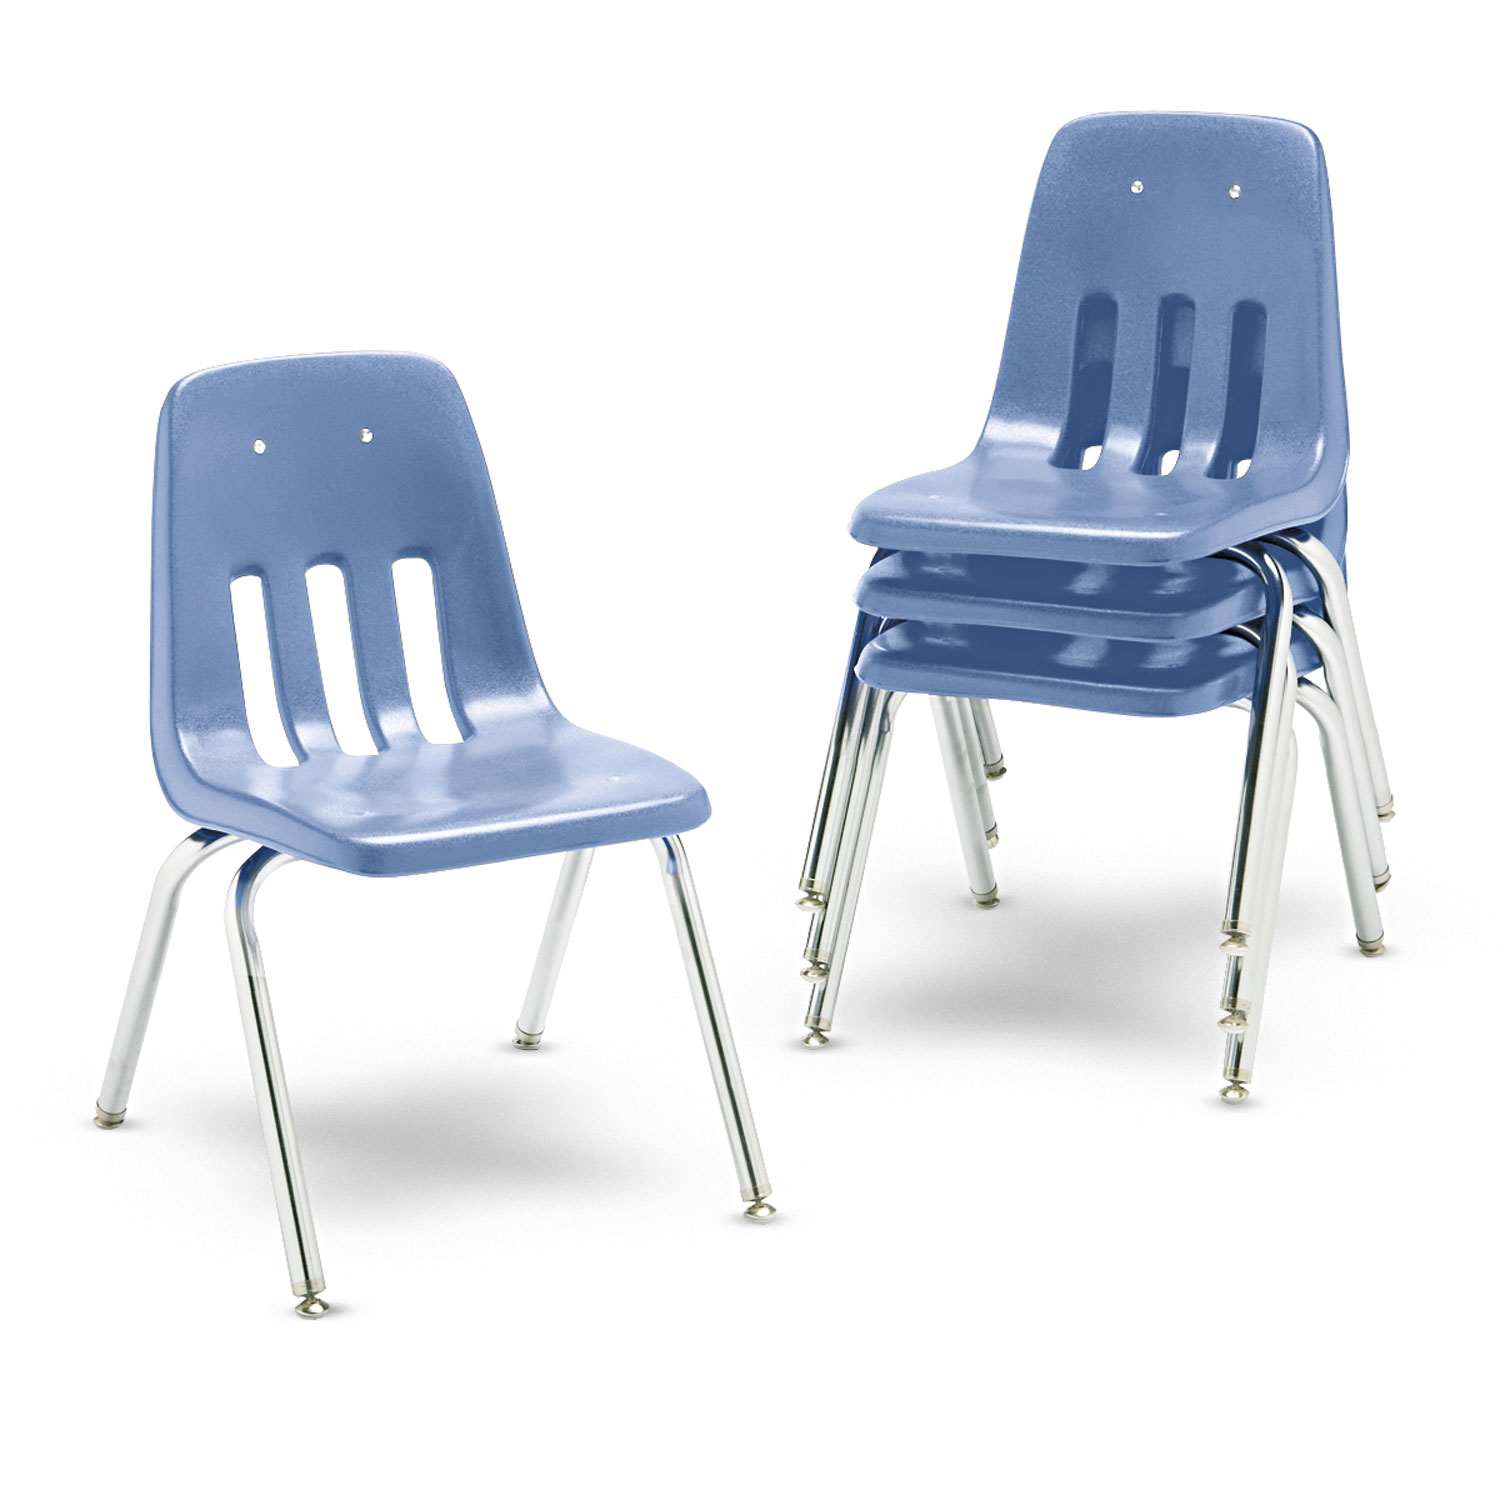 9000 Series Classroom Chairs, 16 Seat Height, Blueberry/Chrome, 4/Carton